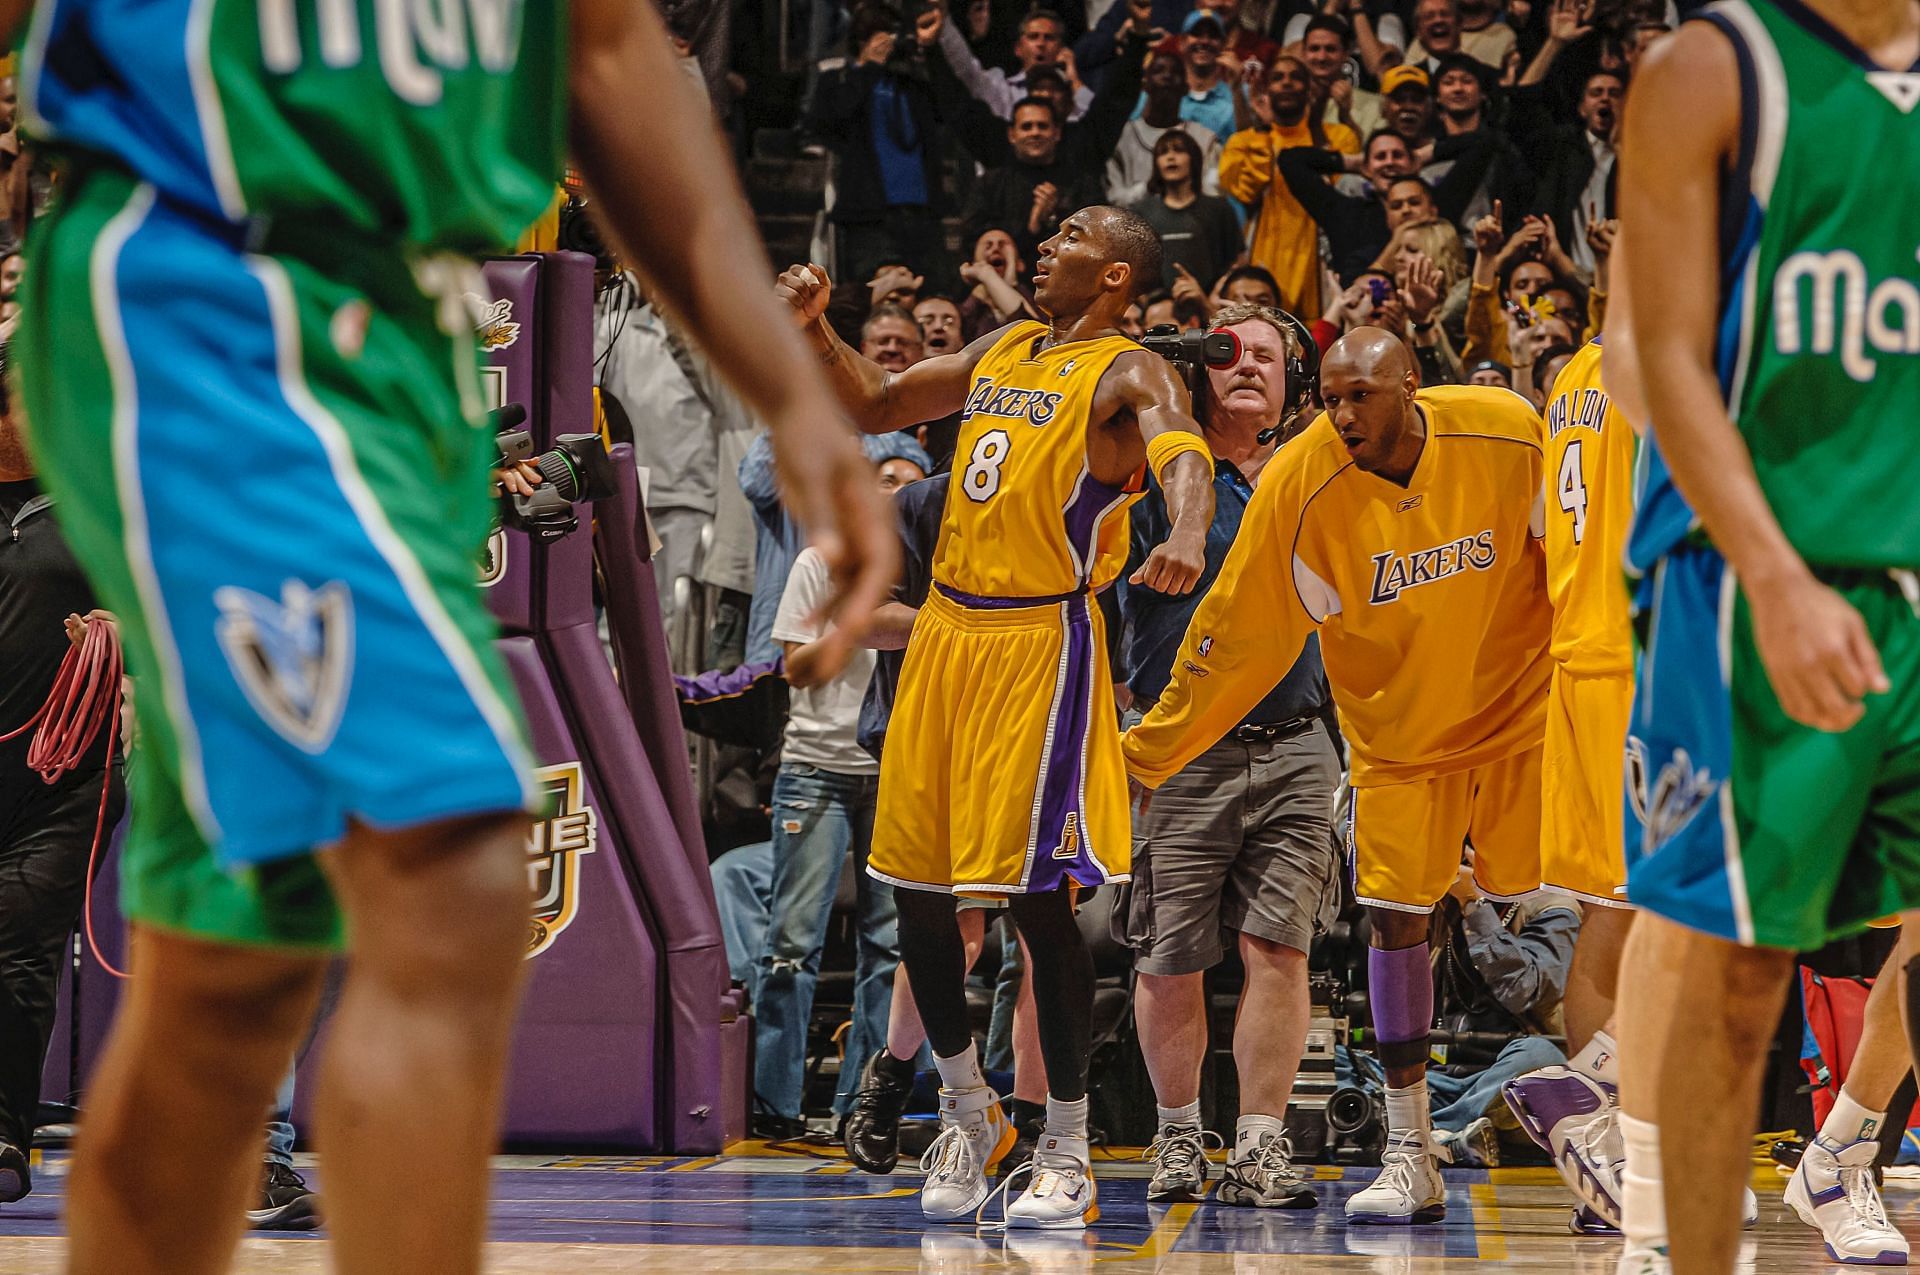 LA Lakers legend Kobe Bryant during his iconic 62-point performance in three quarters against the Dallas Mavericks on Dec. 20, 2005